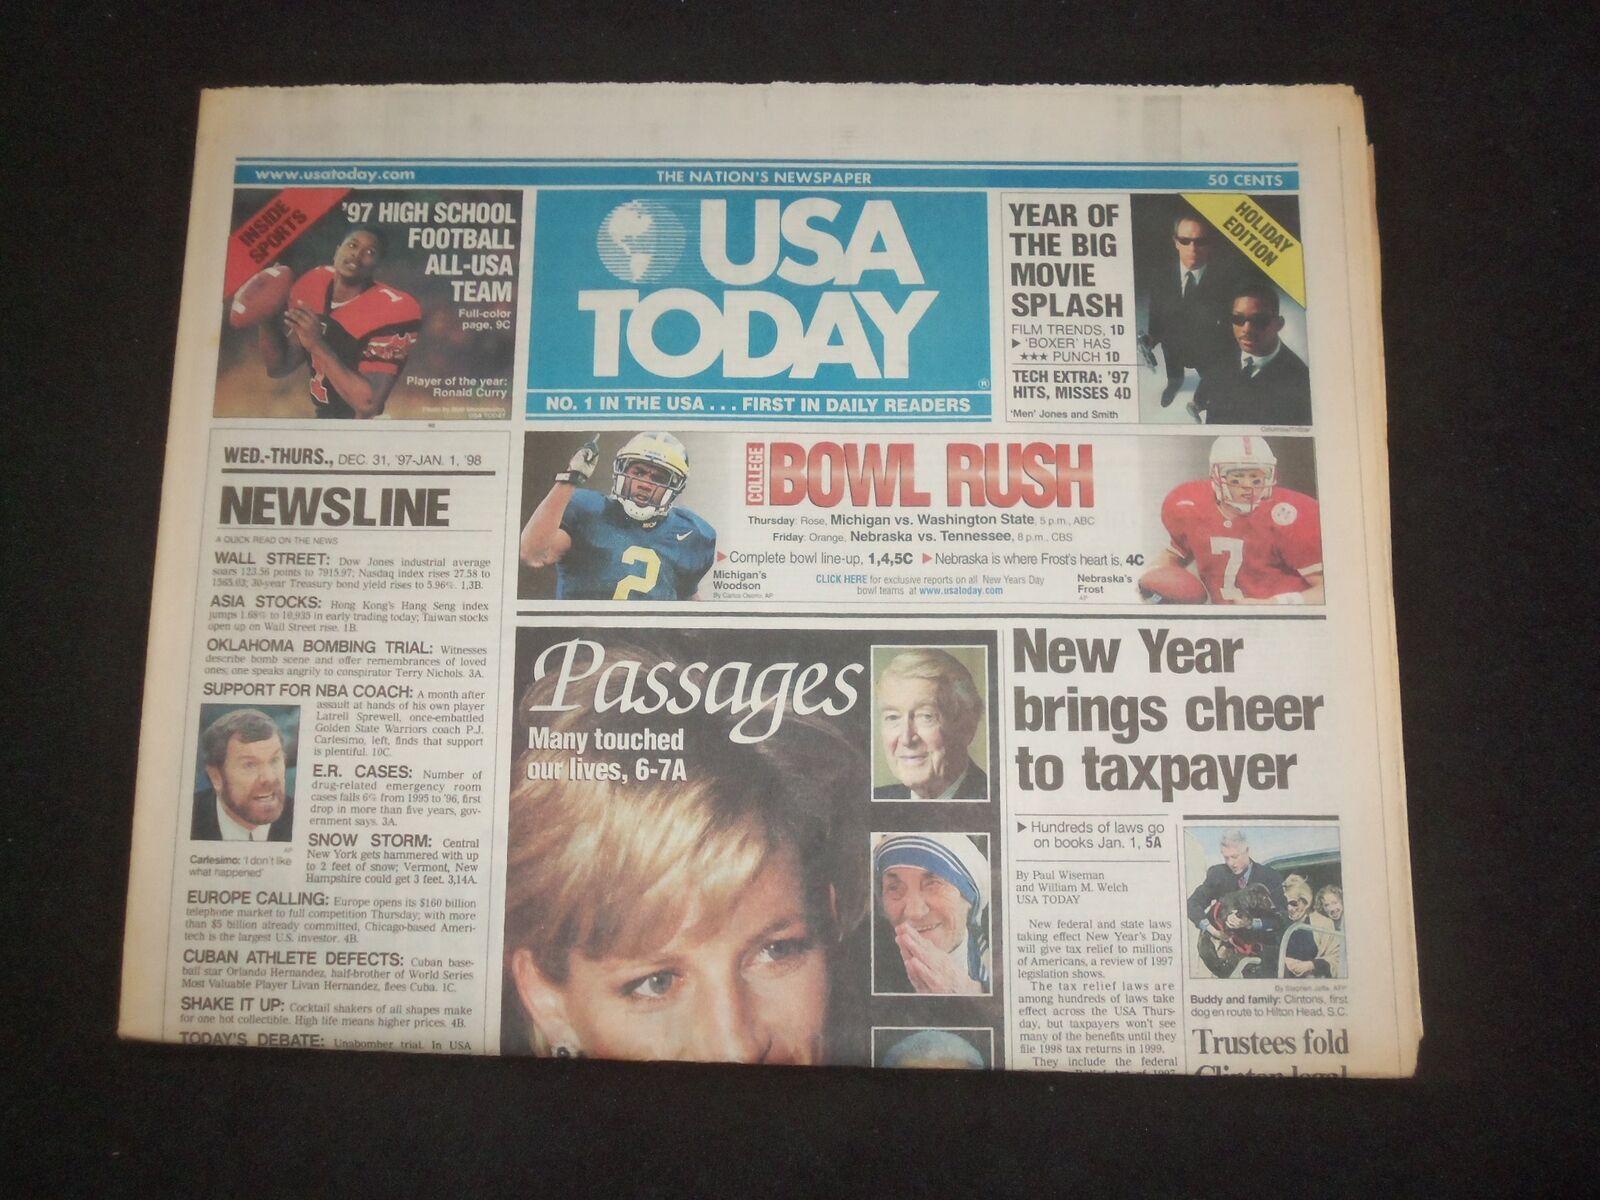 1997 DEC 31 - 1998 JAN 1 USA TODAY NEWSPAPER - NEW YEAR TAXPAYER CHEER - NP 7898